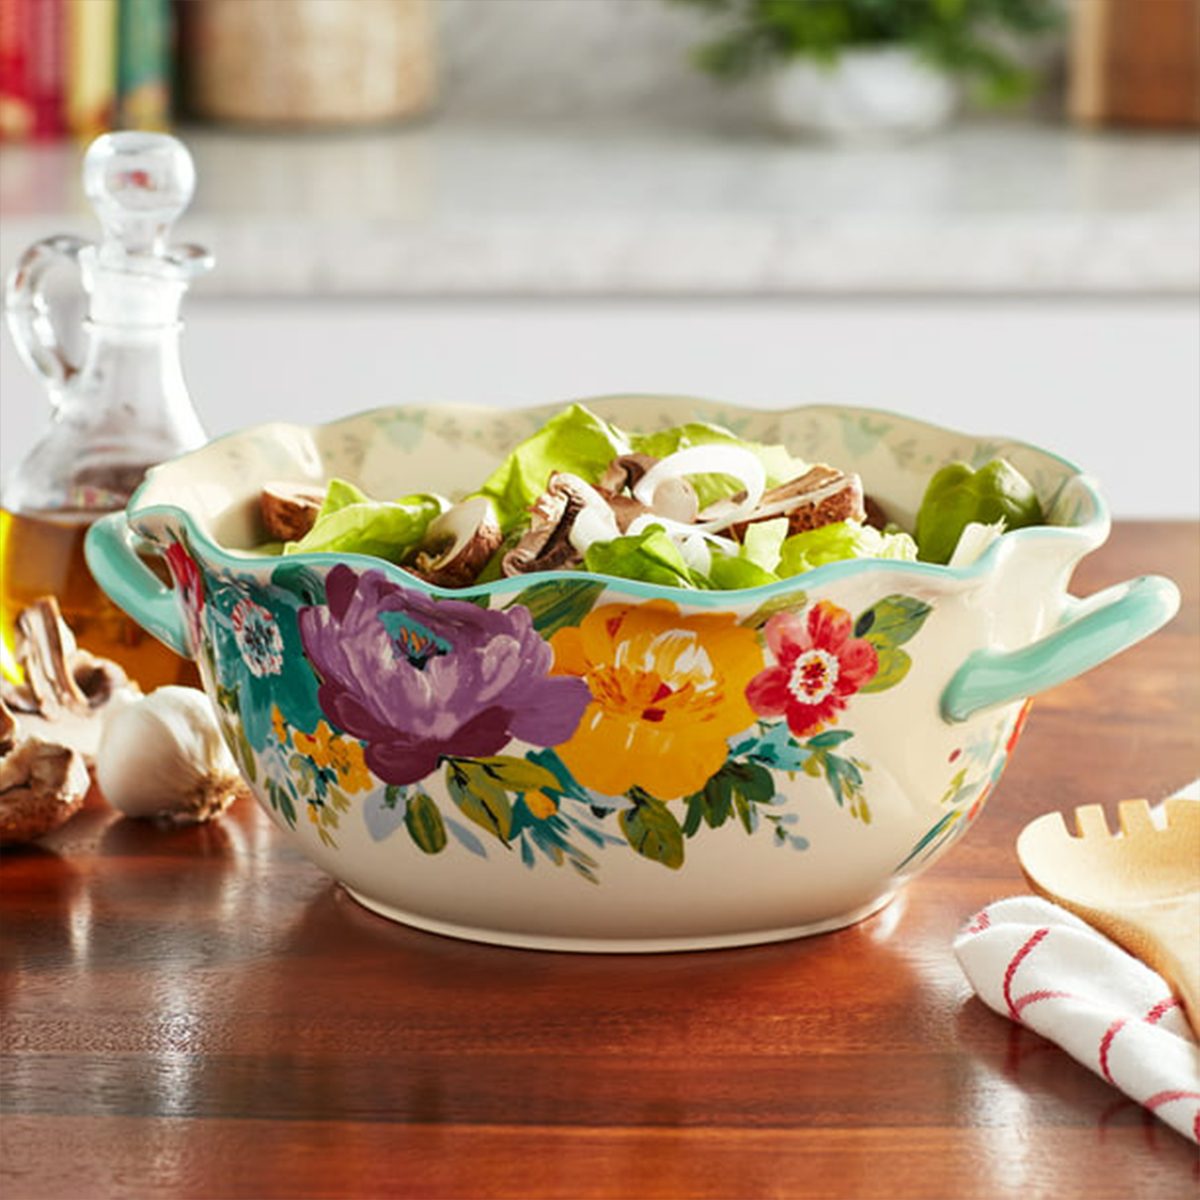 The Pioneer Woman Set of 3 10-inch Salad Bowls in Assorted